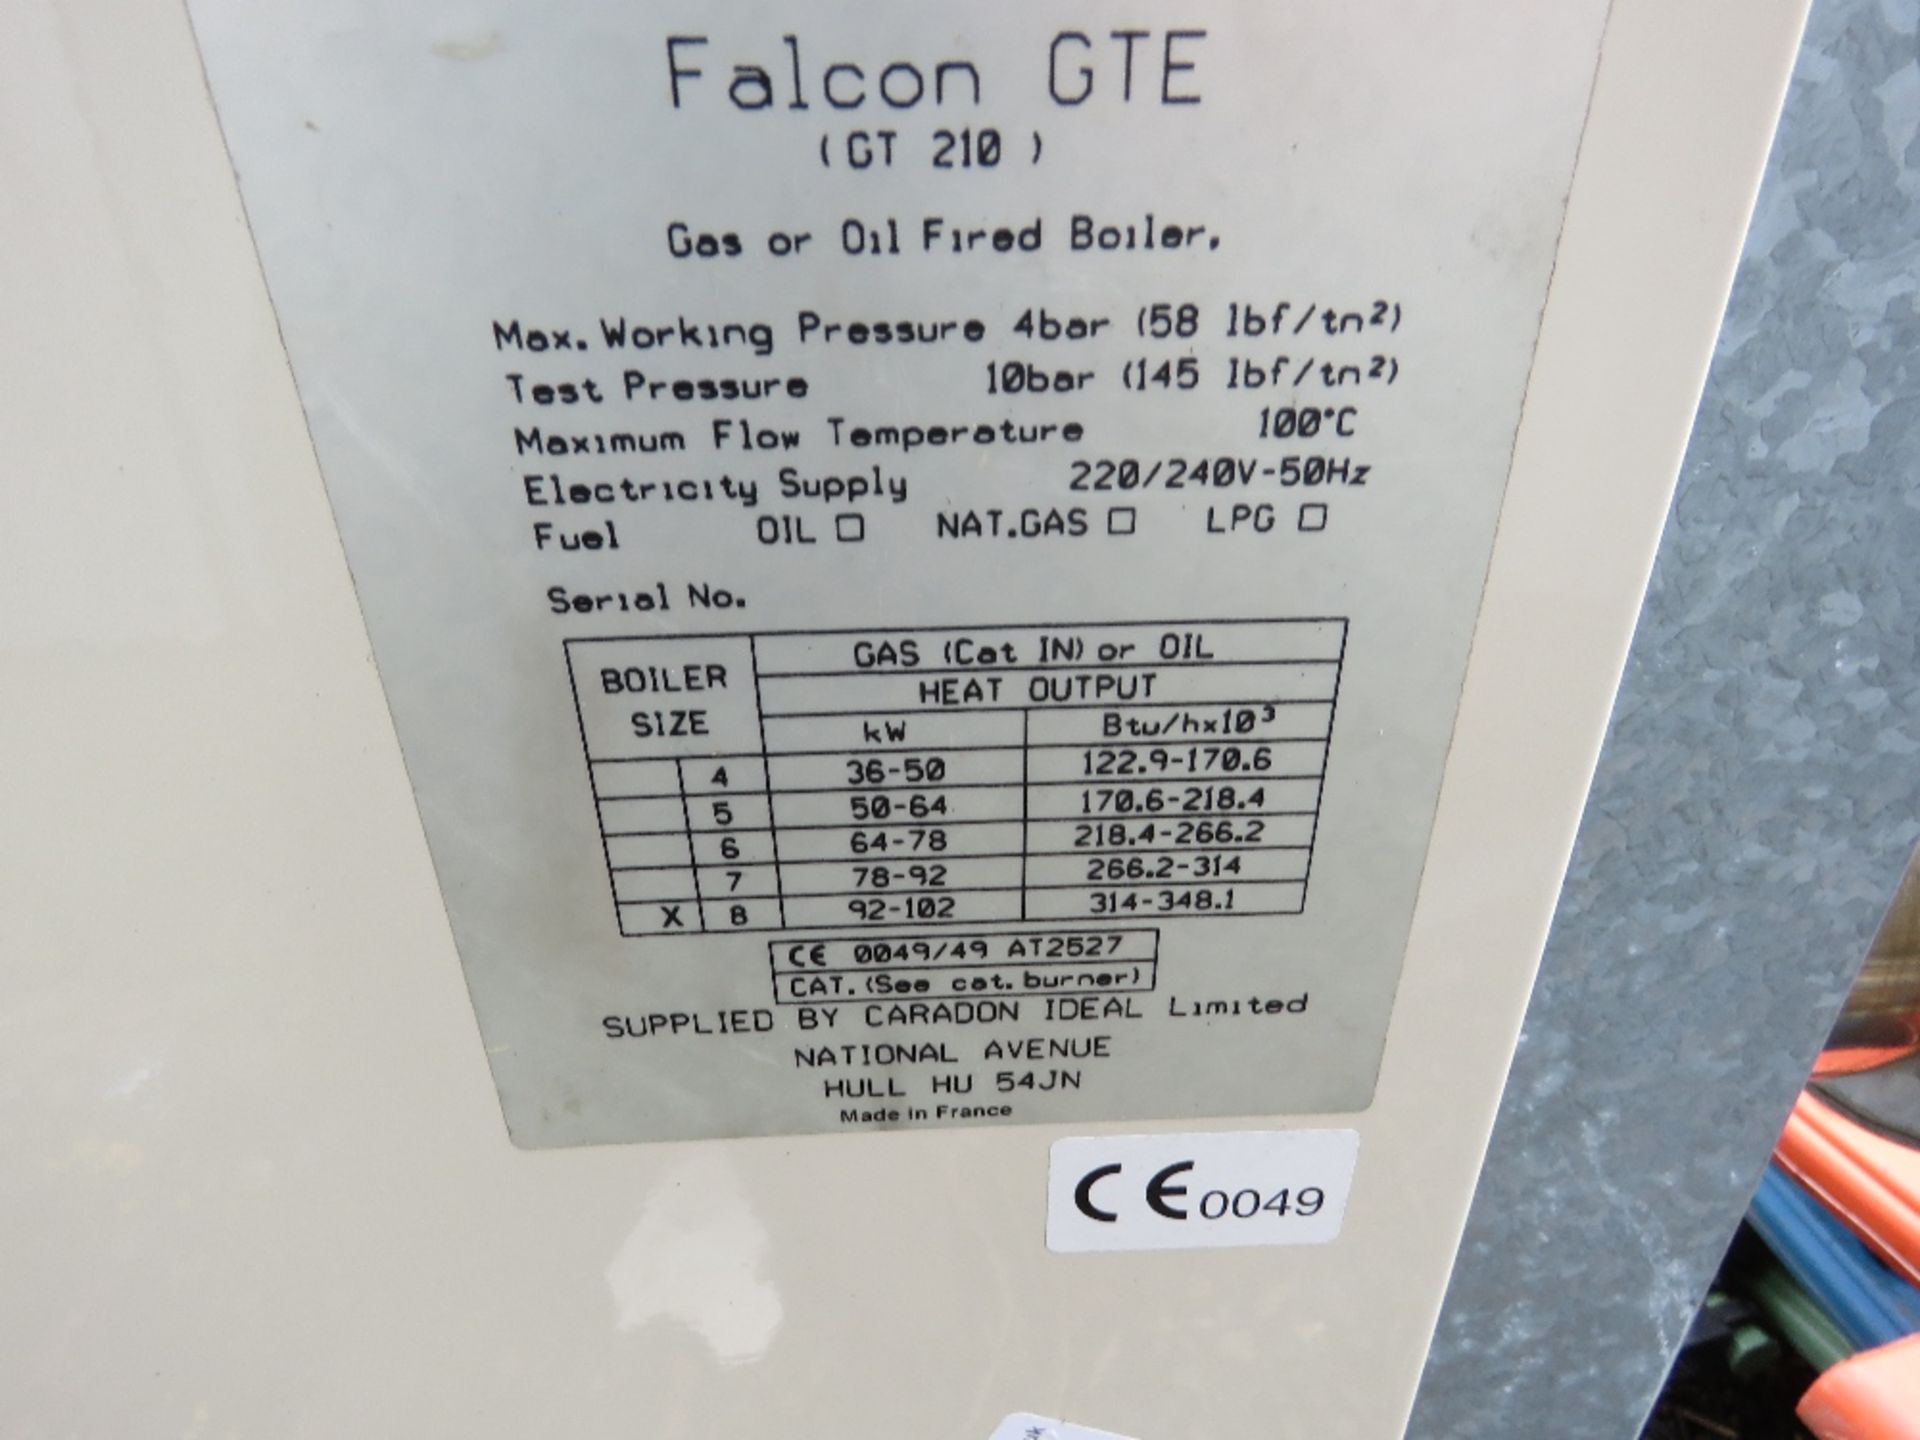 IDEAL FALCON GTE GT210 HEATER WITH CHIMNEY SECTIONS, PREVIOUSLY USED ON LIQUID FUEL. SOURCED FROM MU - Image 9 of 10